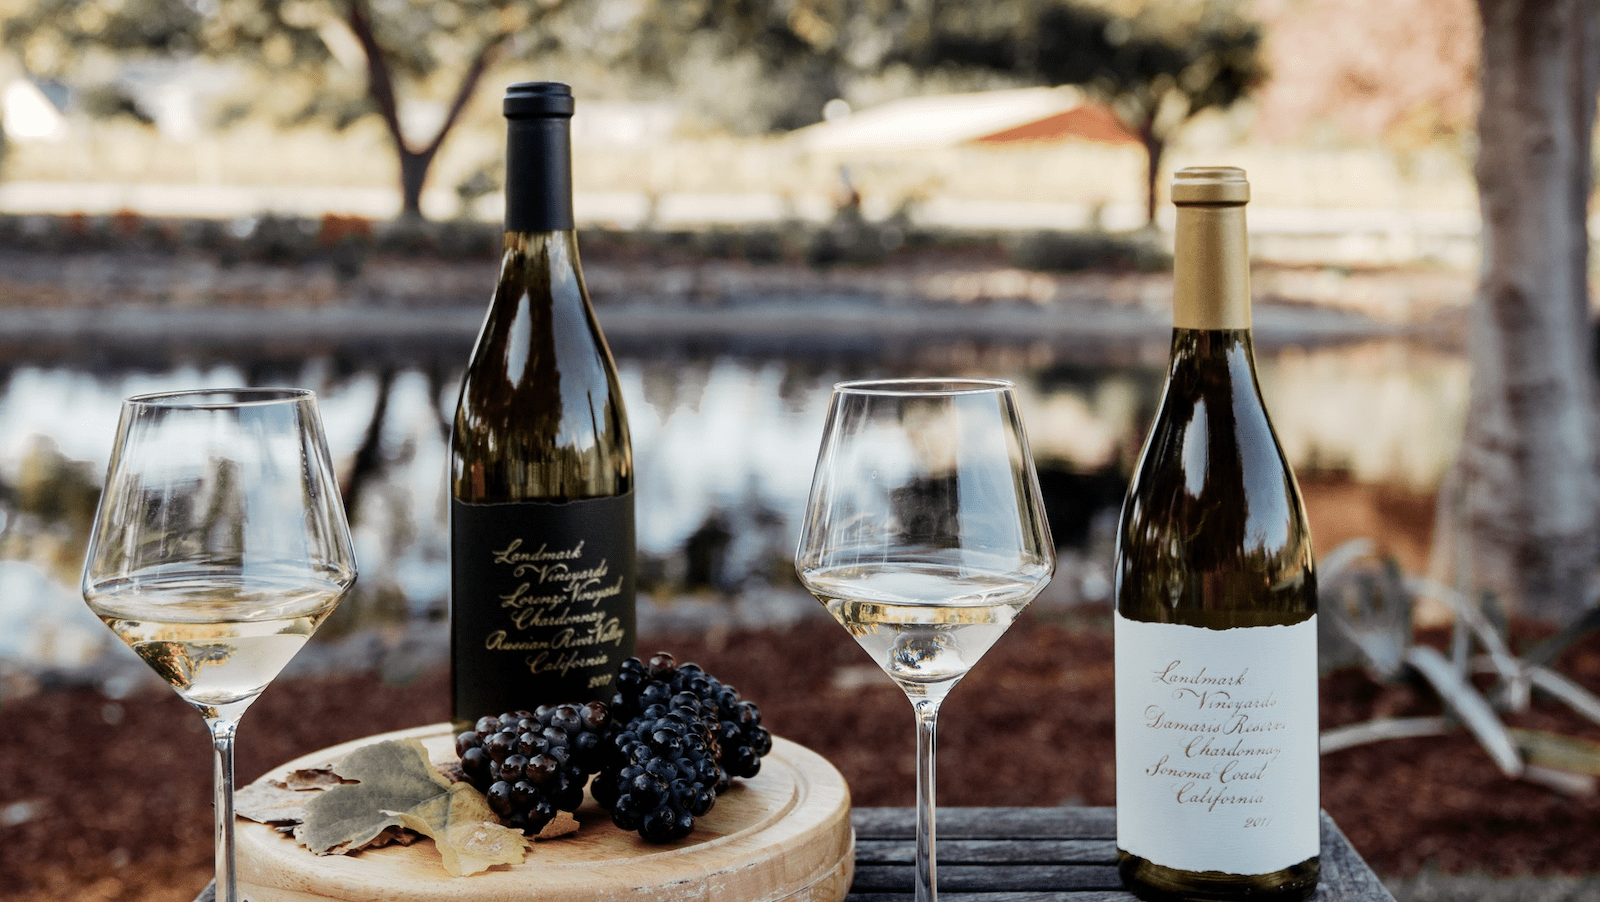 Bottles and glasses of wine for Winter Wineland January event in Sonoma